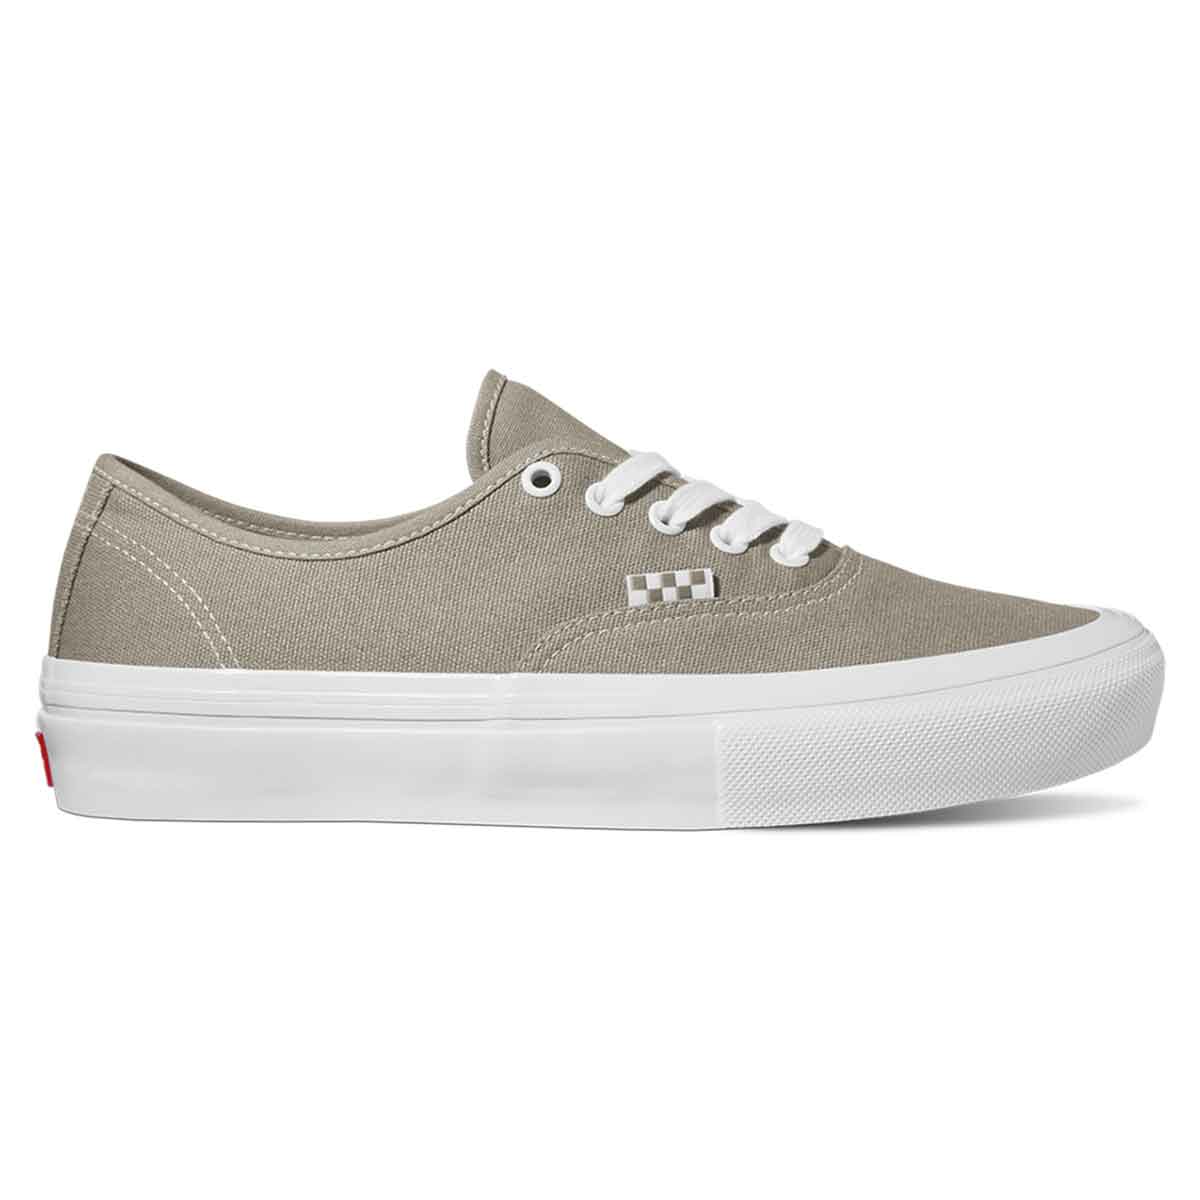 Vans Skate Authentic Shoes - Wrapped Drizzle